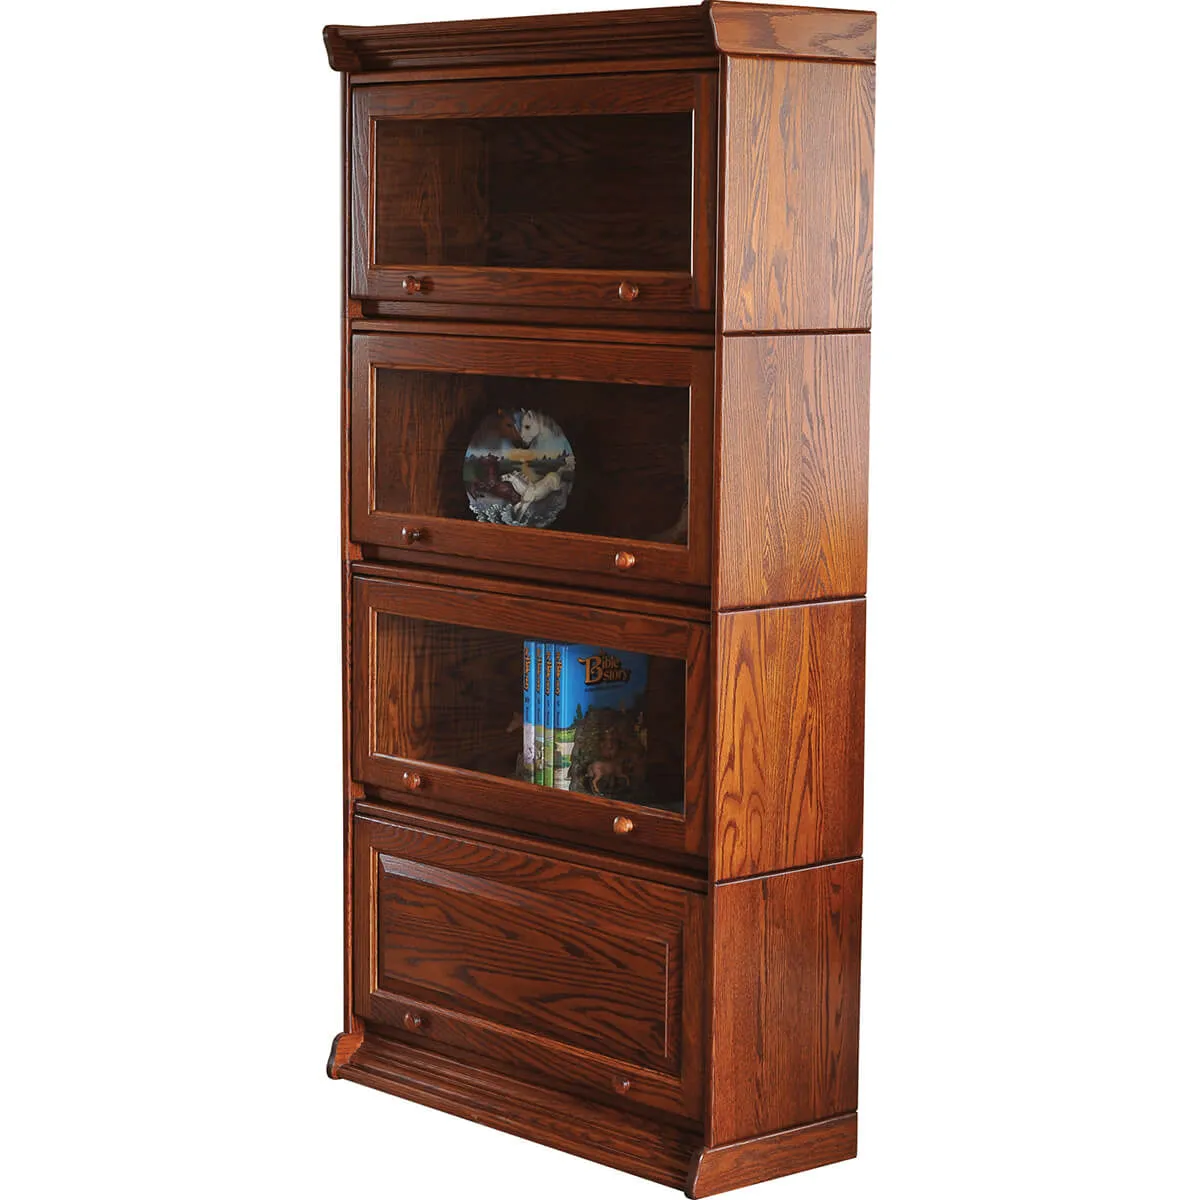 Barrister Bookcase - Stackable Unit 4